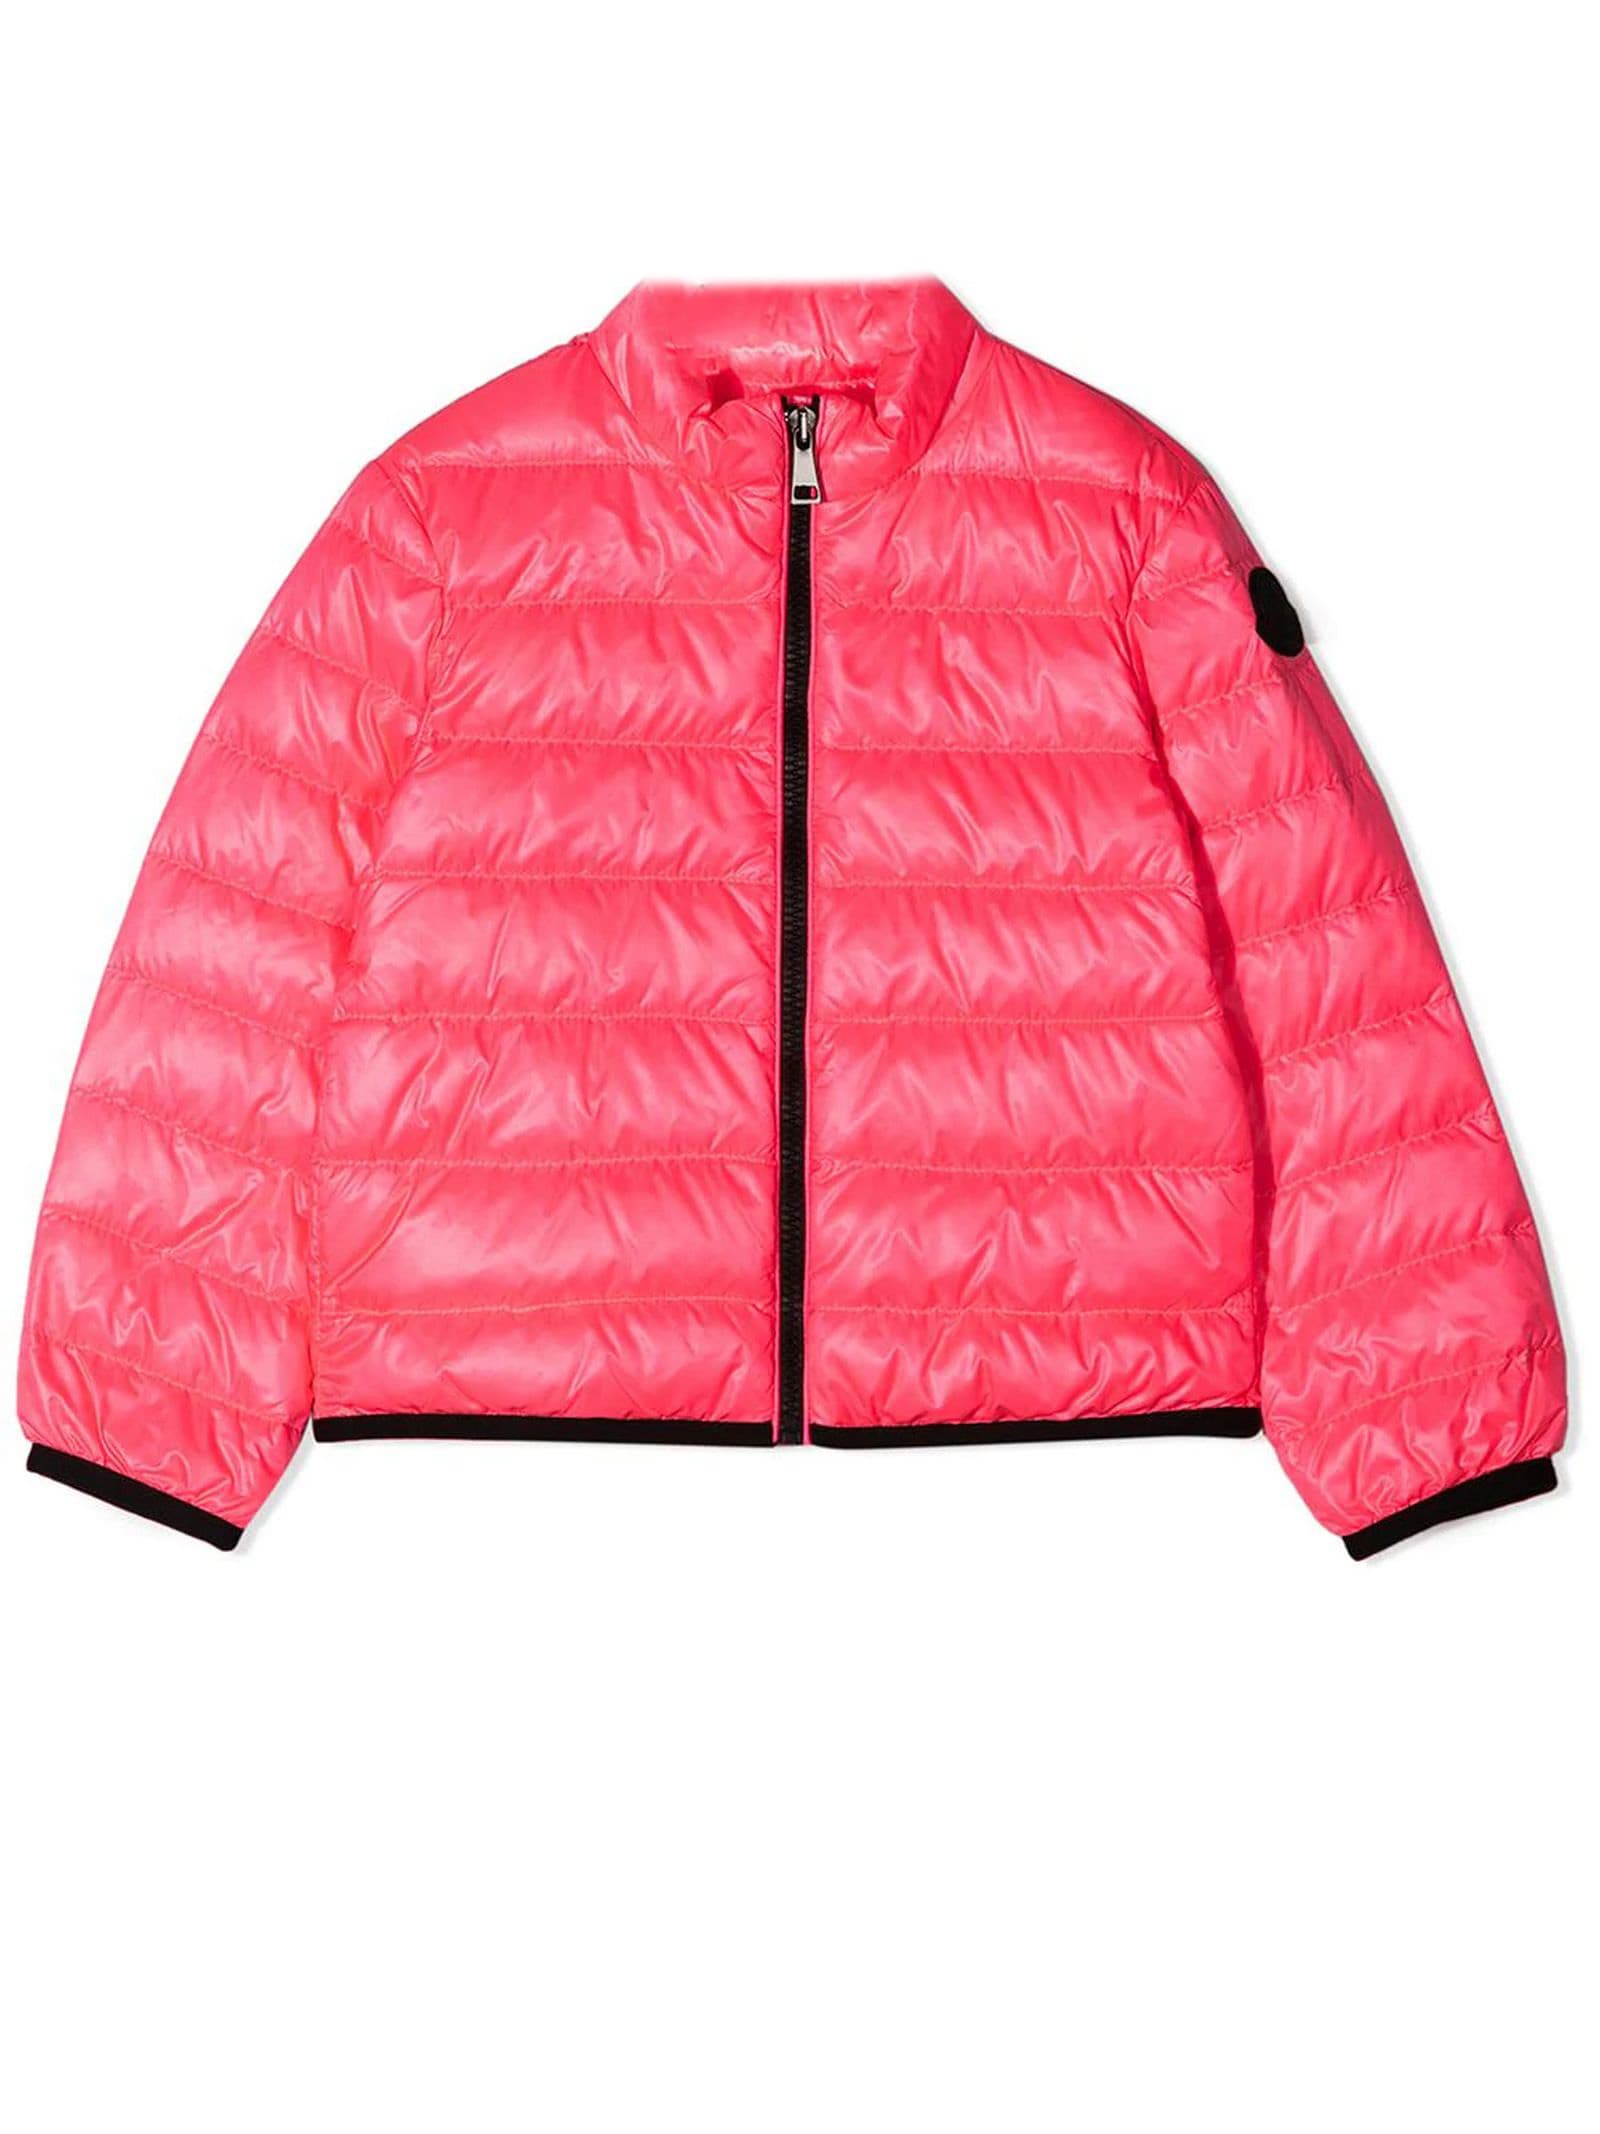 Moncler Pink Feather Down Padded Jacket